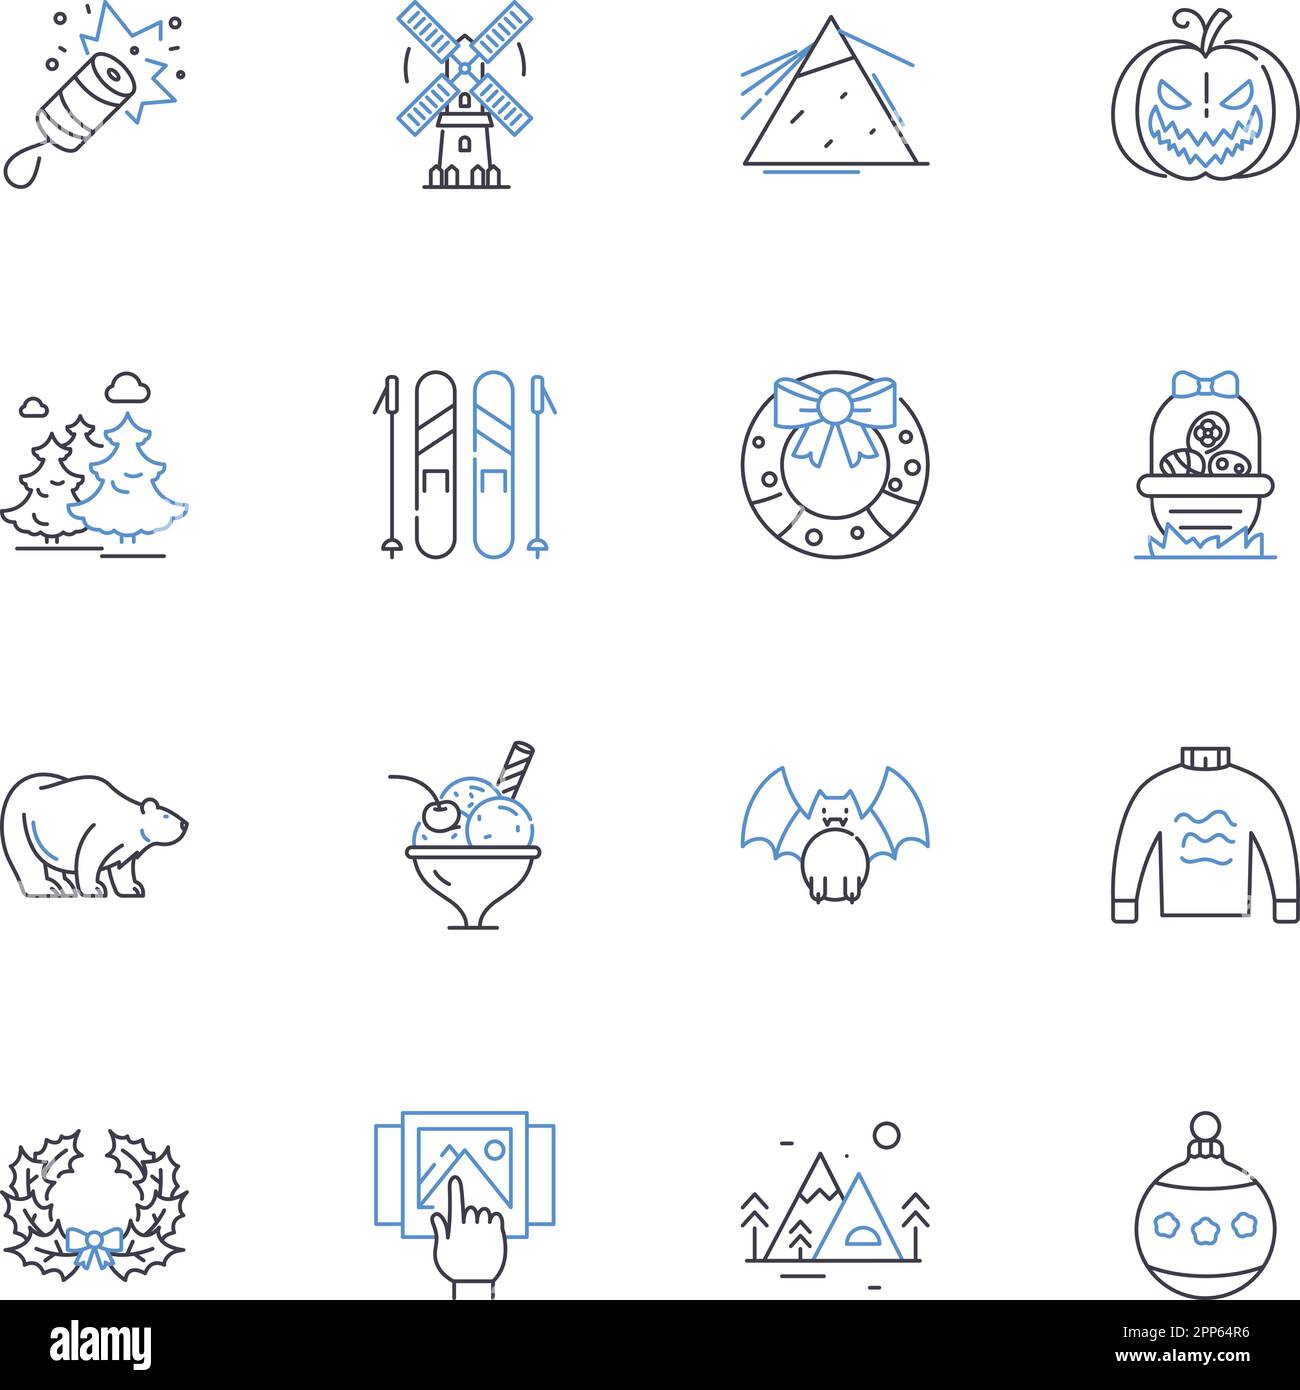 Frozen line icons collection. Elsa, Anna, Olaf, Kristoff, Sven, Arendelle, Ice vector and linear illustration. Snow,Magic,Sisters outline signs set Stock Vector